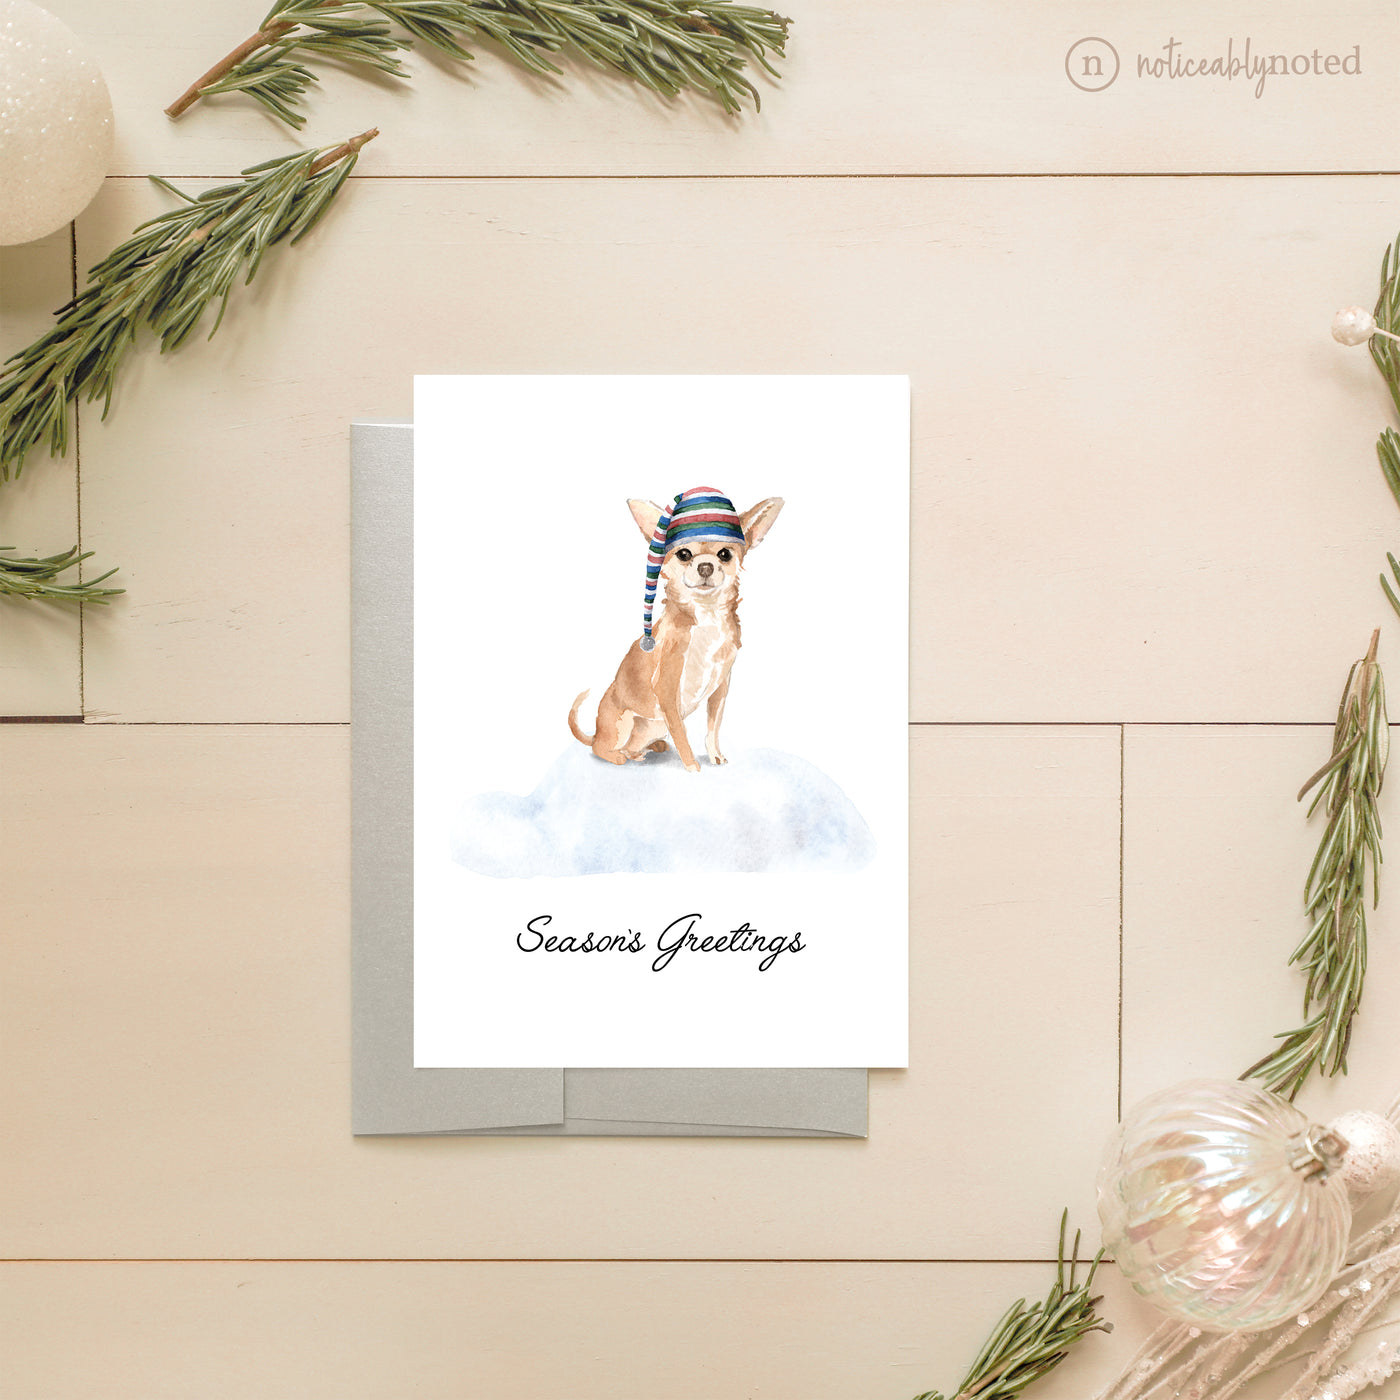 Chihuahua Dog Holiday Card | Noticeably Noted